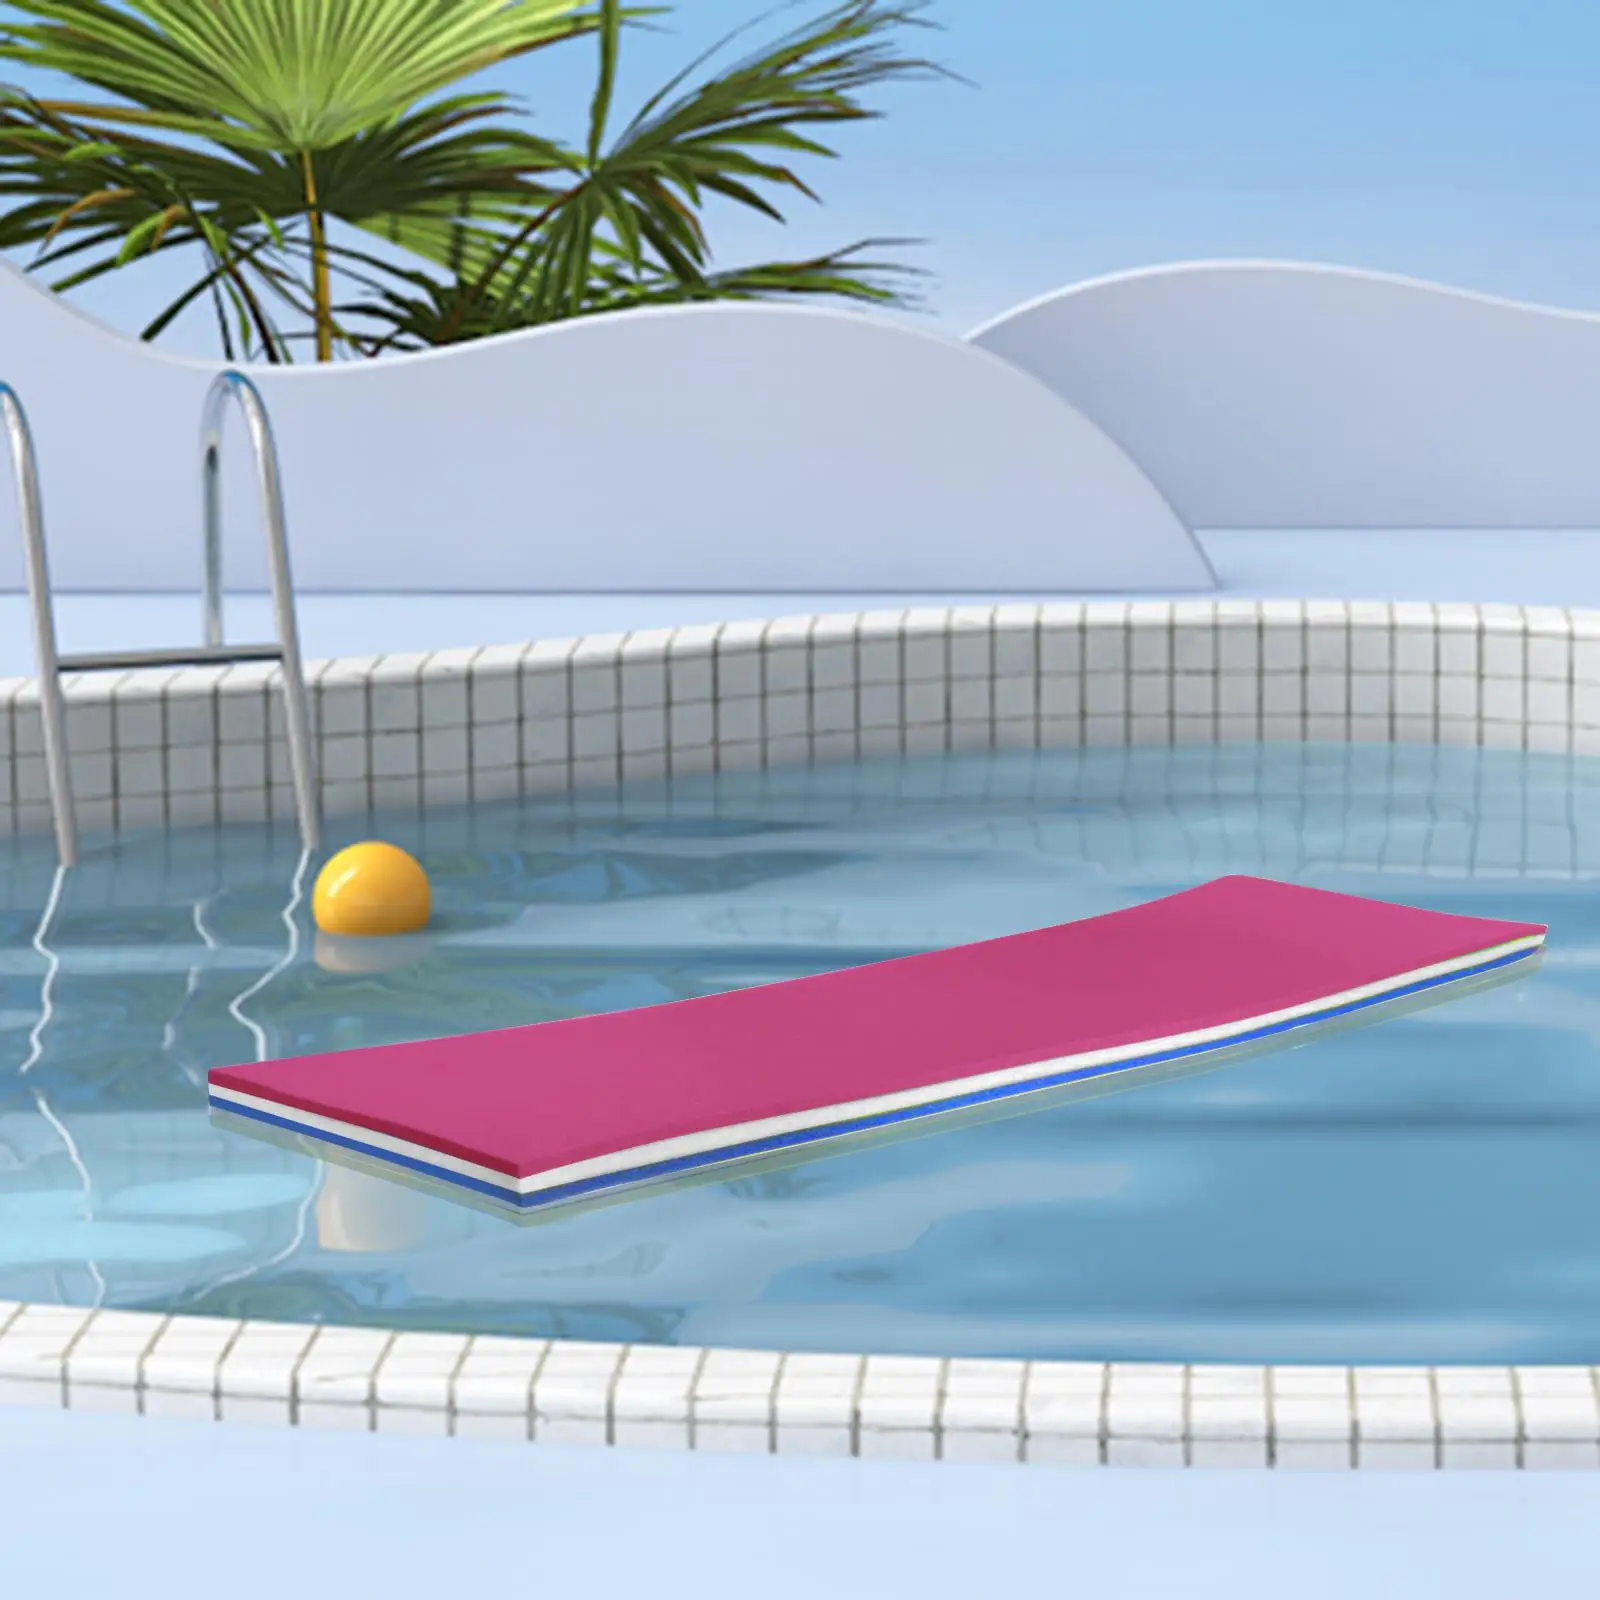 

Pool Floating Water Mat 3 Layer Water Raft 43x15.7x1.3Inches for Playing, Relaxing, Recreation Roll up Pad Pink White Blue